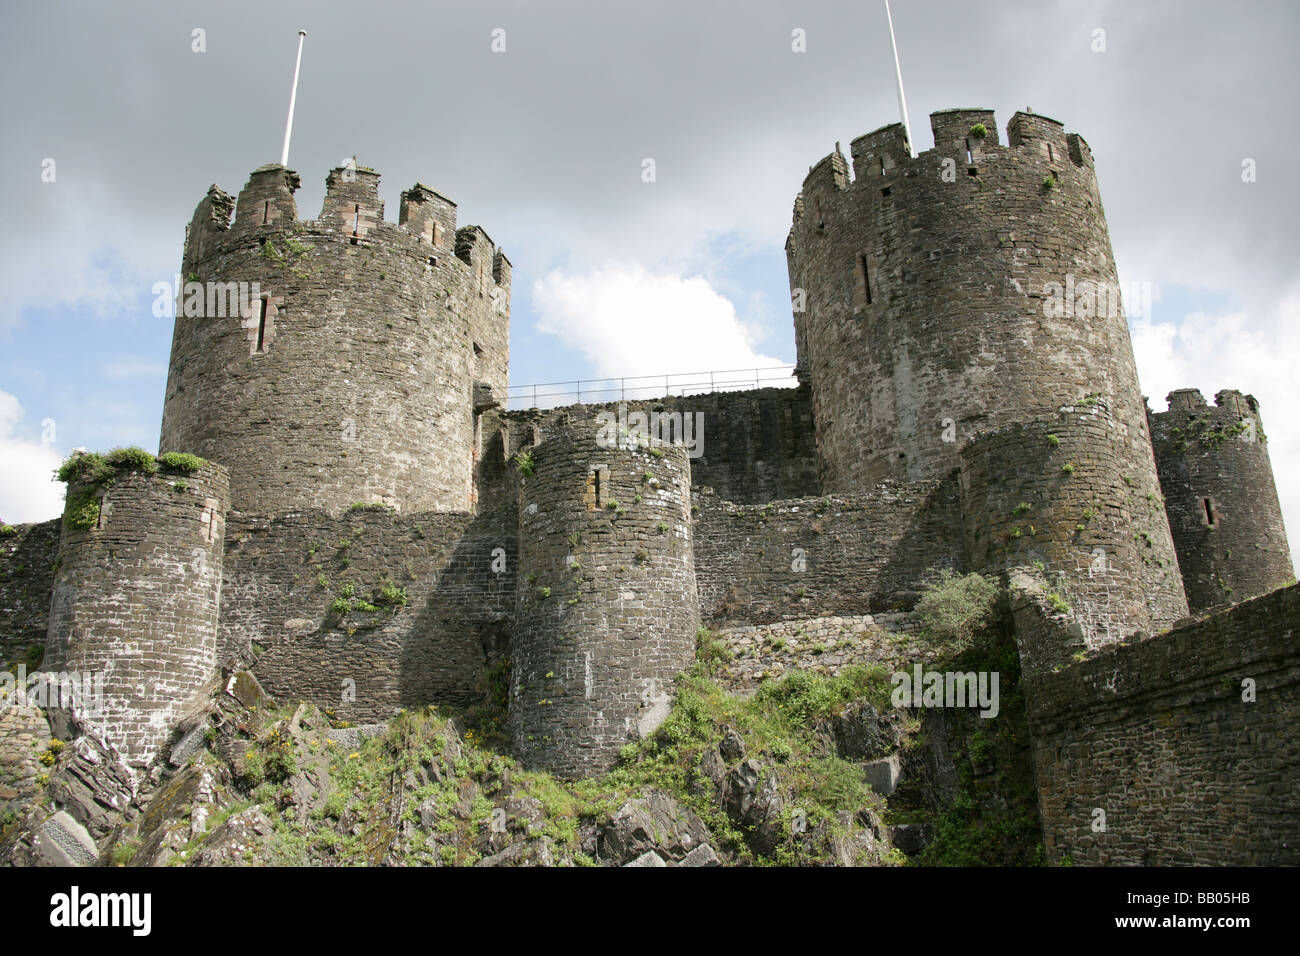 Town of Conwy, Wales. West elevation view of Conwy Castle walls and promontory. Stock Photo